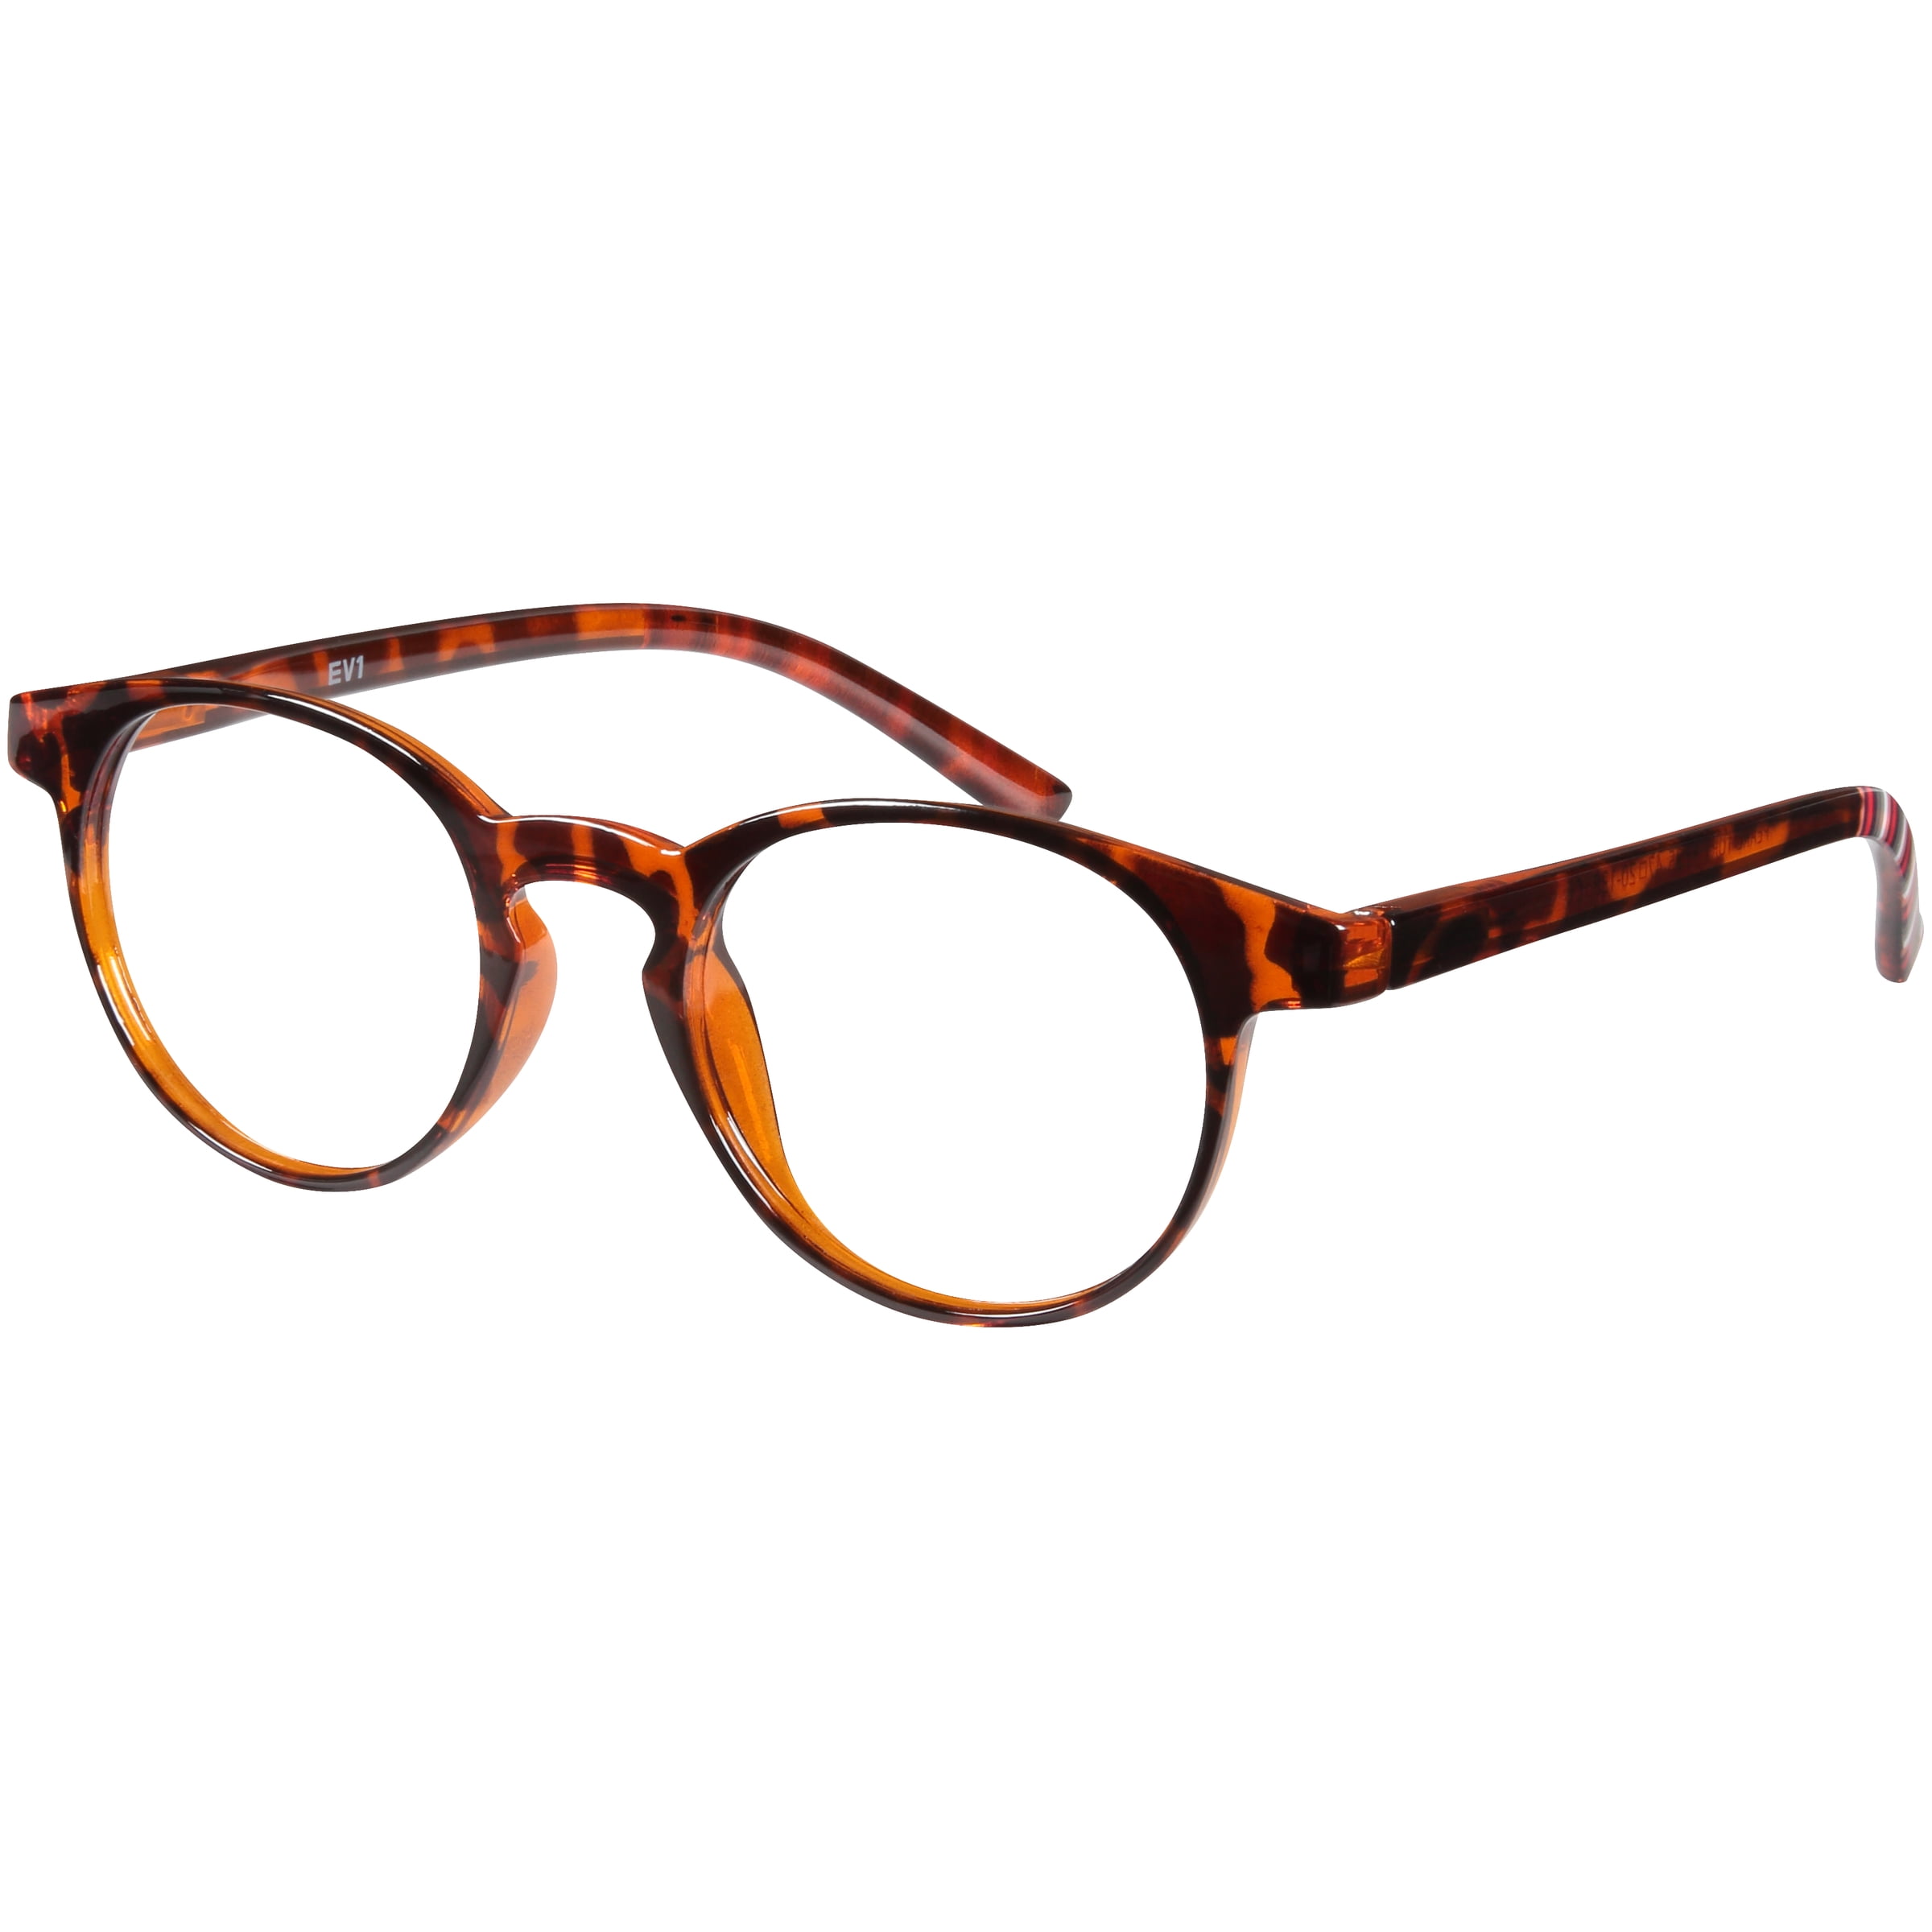 EV1 Pearl Tortoise +1.25 Reading Glasses with Case